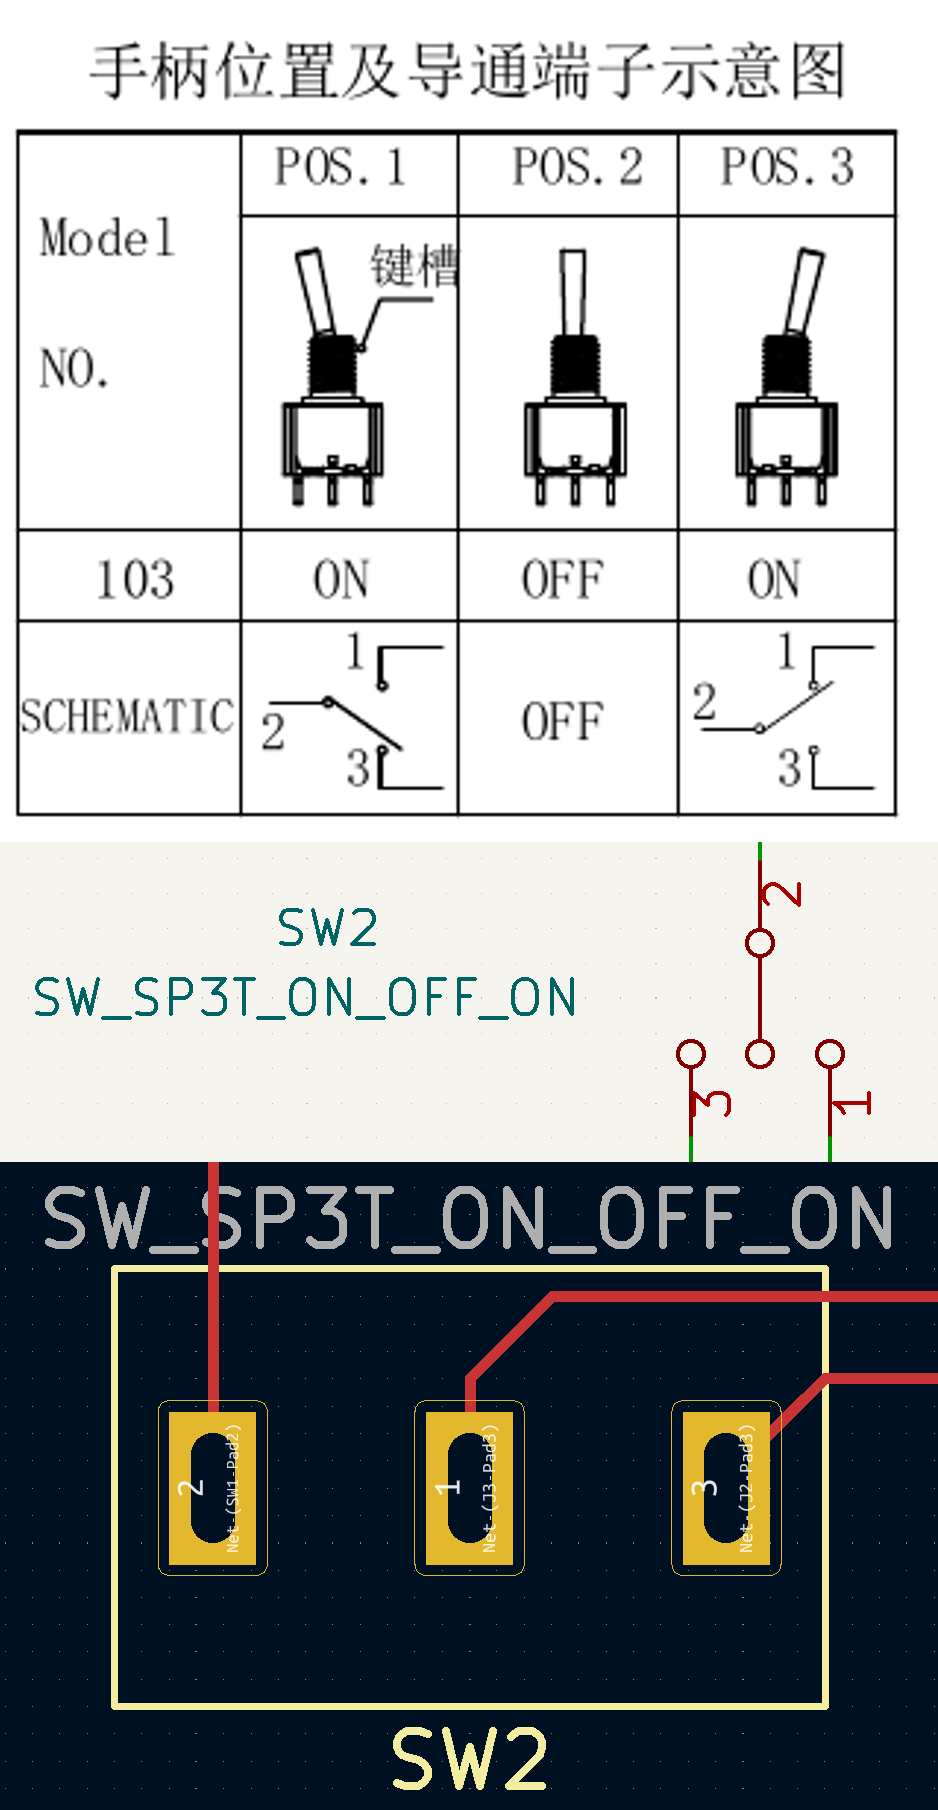 Wiring diagram on datasheet, close-ups of schematic and PCB layout